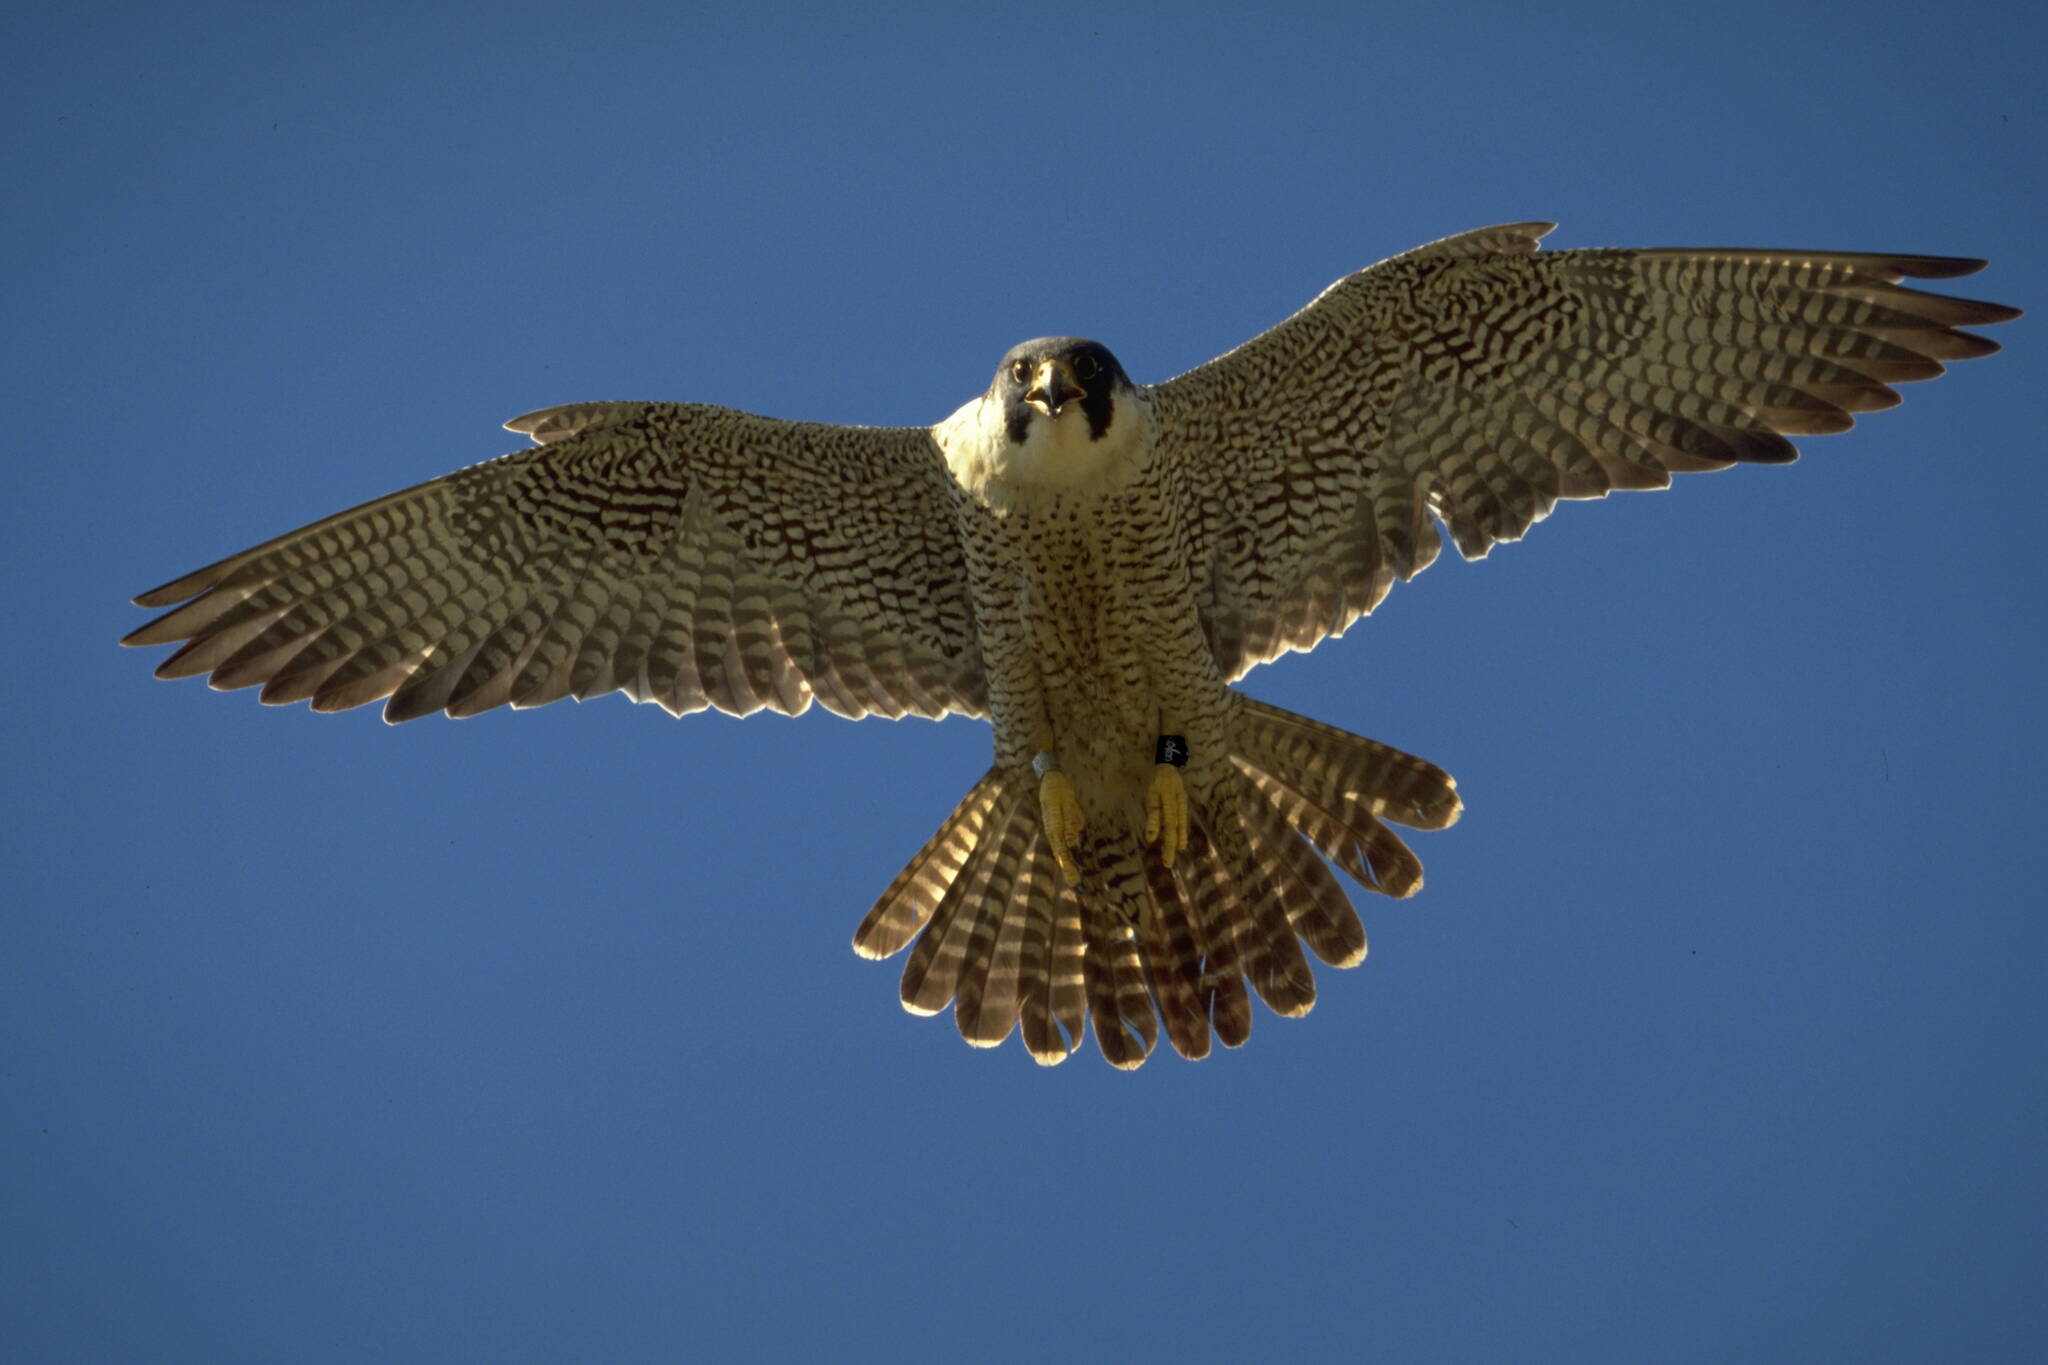 An adult peregrine falcon in flight over Alaska. (Photo by Ted Swem)